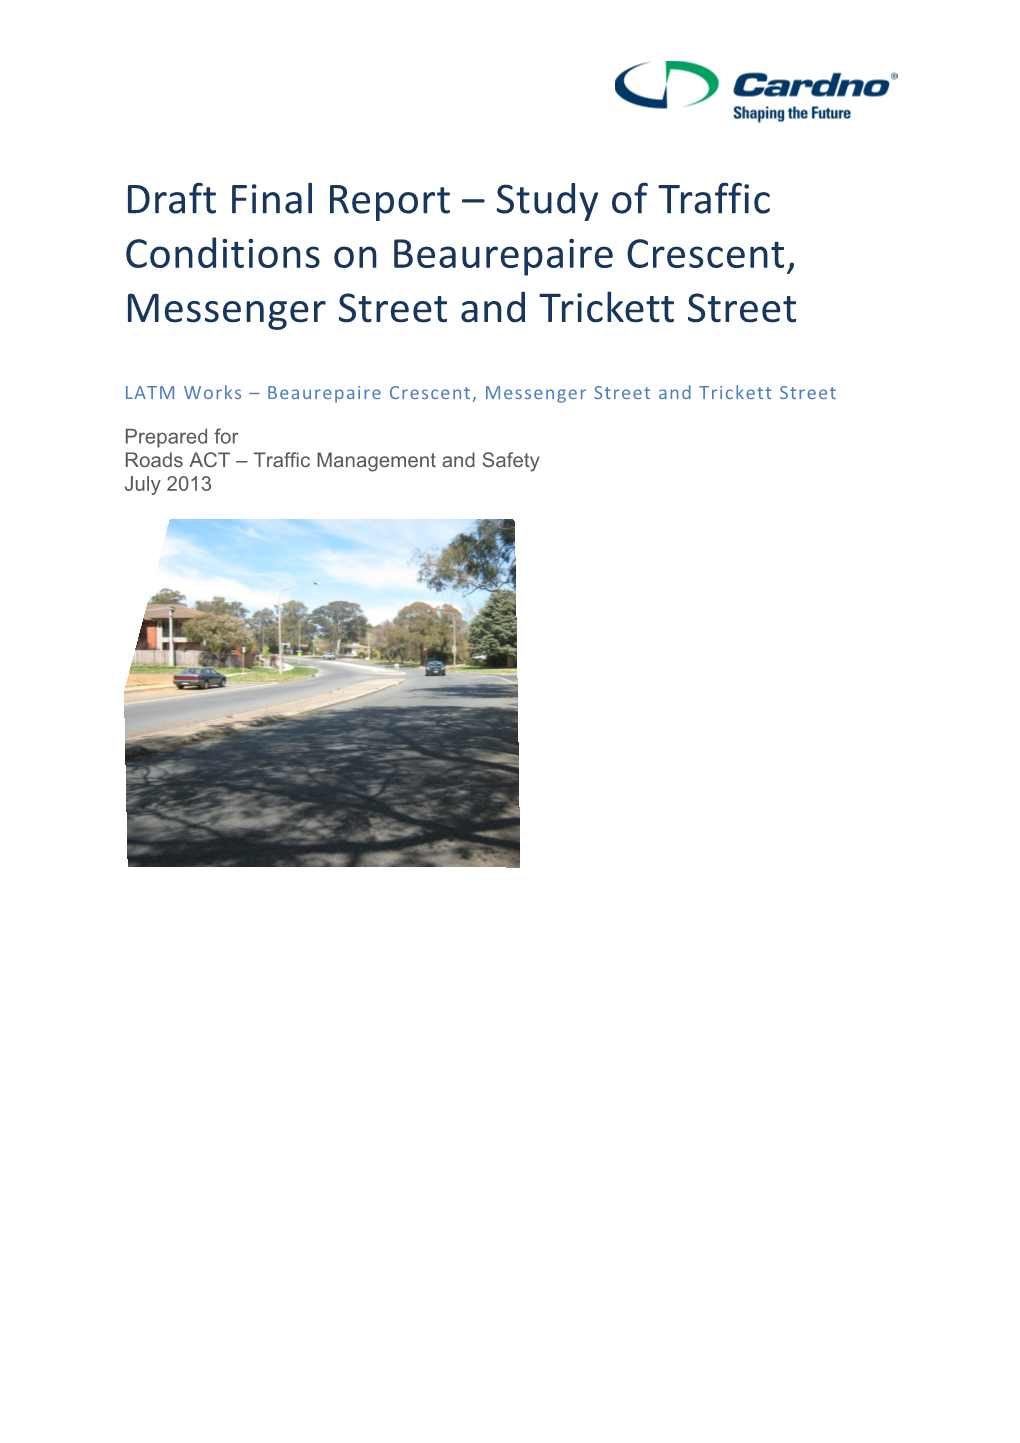 Executive Summary - Study of Traffic Conditions in Holt